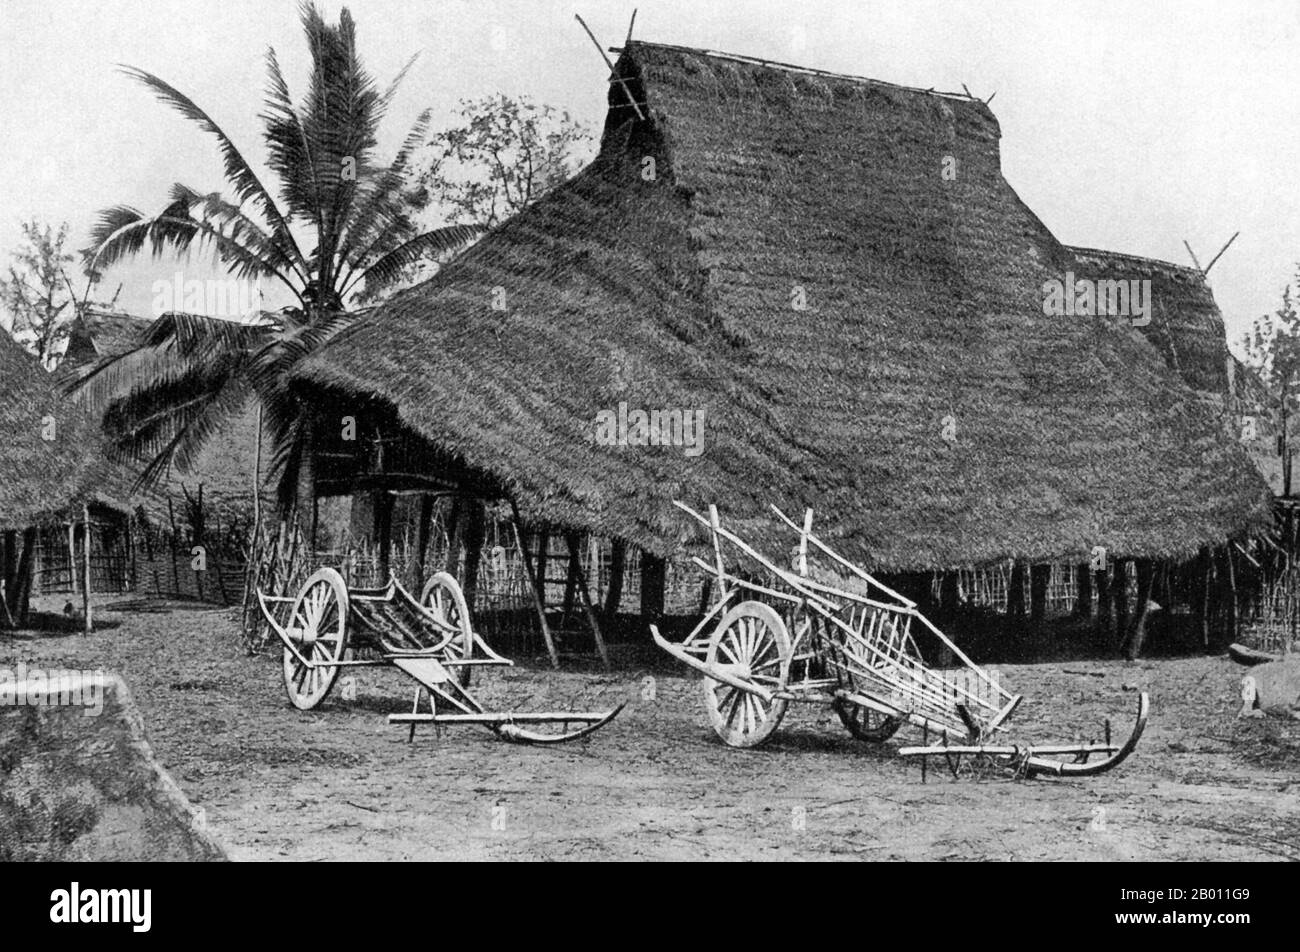 Thailand: Ox carts lie in front of a traditional thatched wooden house on stilts in rural Phitsanulok, central Thailand, c. 1900.  Phitsanulok is an ancient city in the lower plains of northern Thailand. It was capital of the Ayutthaya kingdom for 25 years from 1463 after a series of Burmese invasions. Although Phitsanulok is not located far to the north, the people of the region were known to the central Siamese as Lao at the turn of the 20th century. Stock Photo